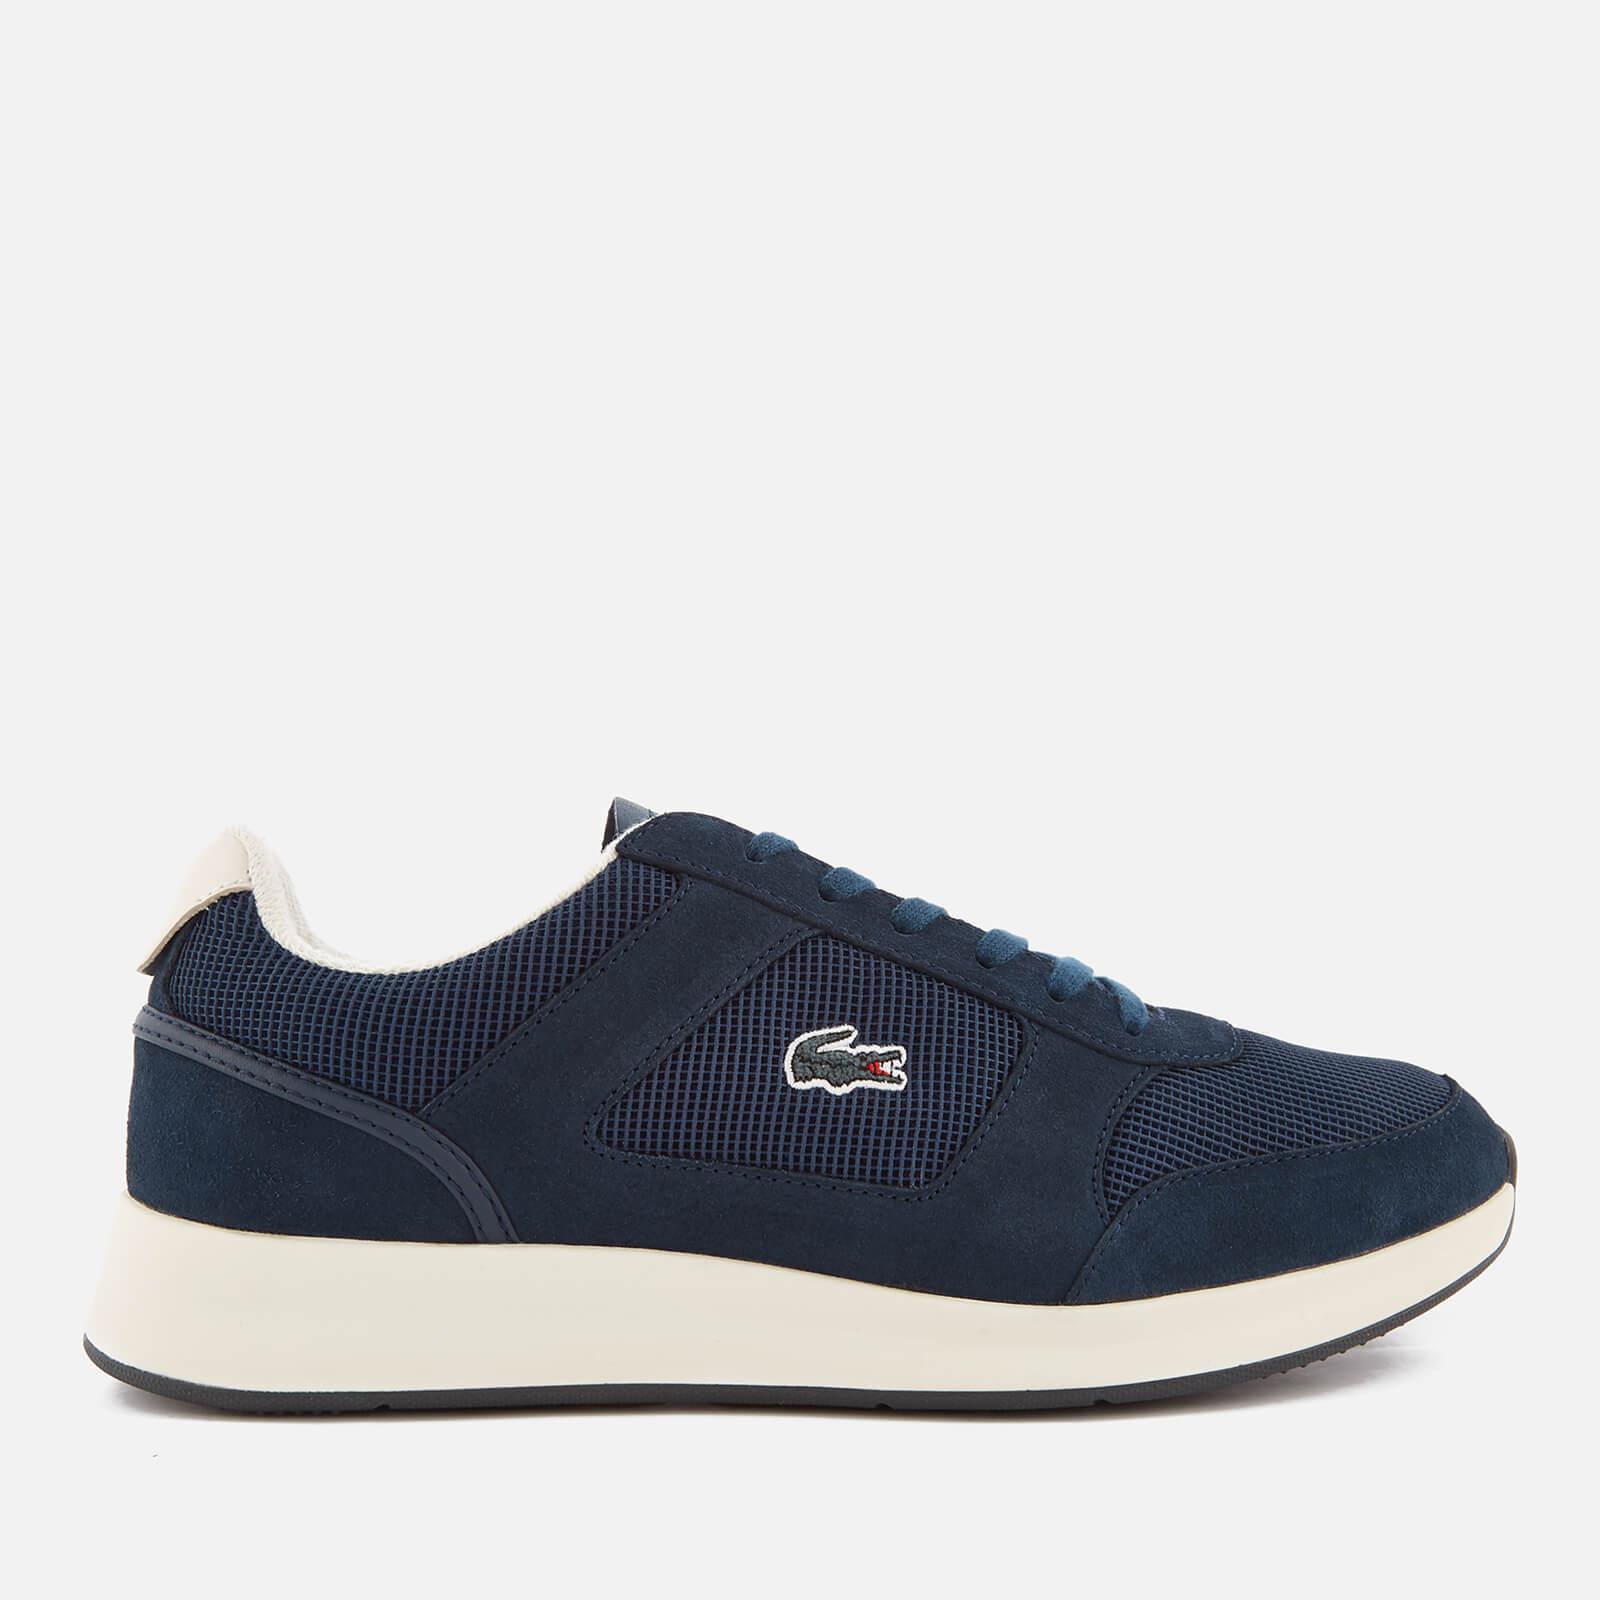 Joggeur 118 1 Runner Trainers in Navy 